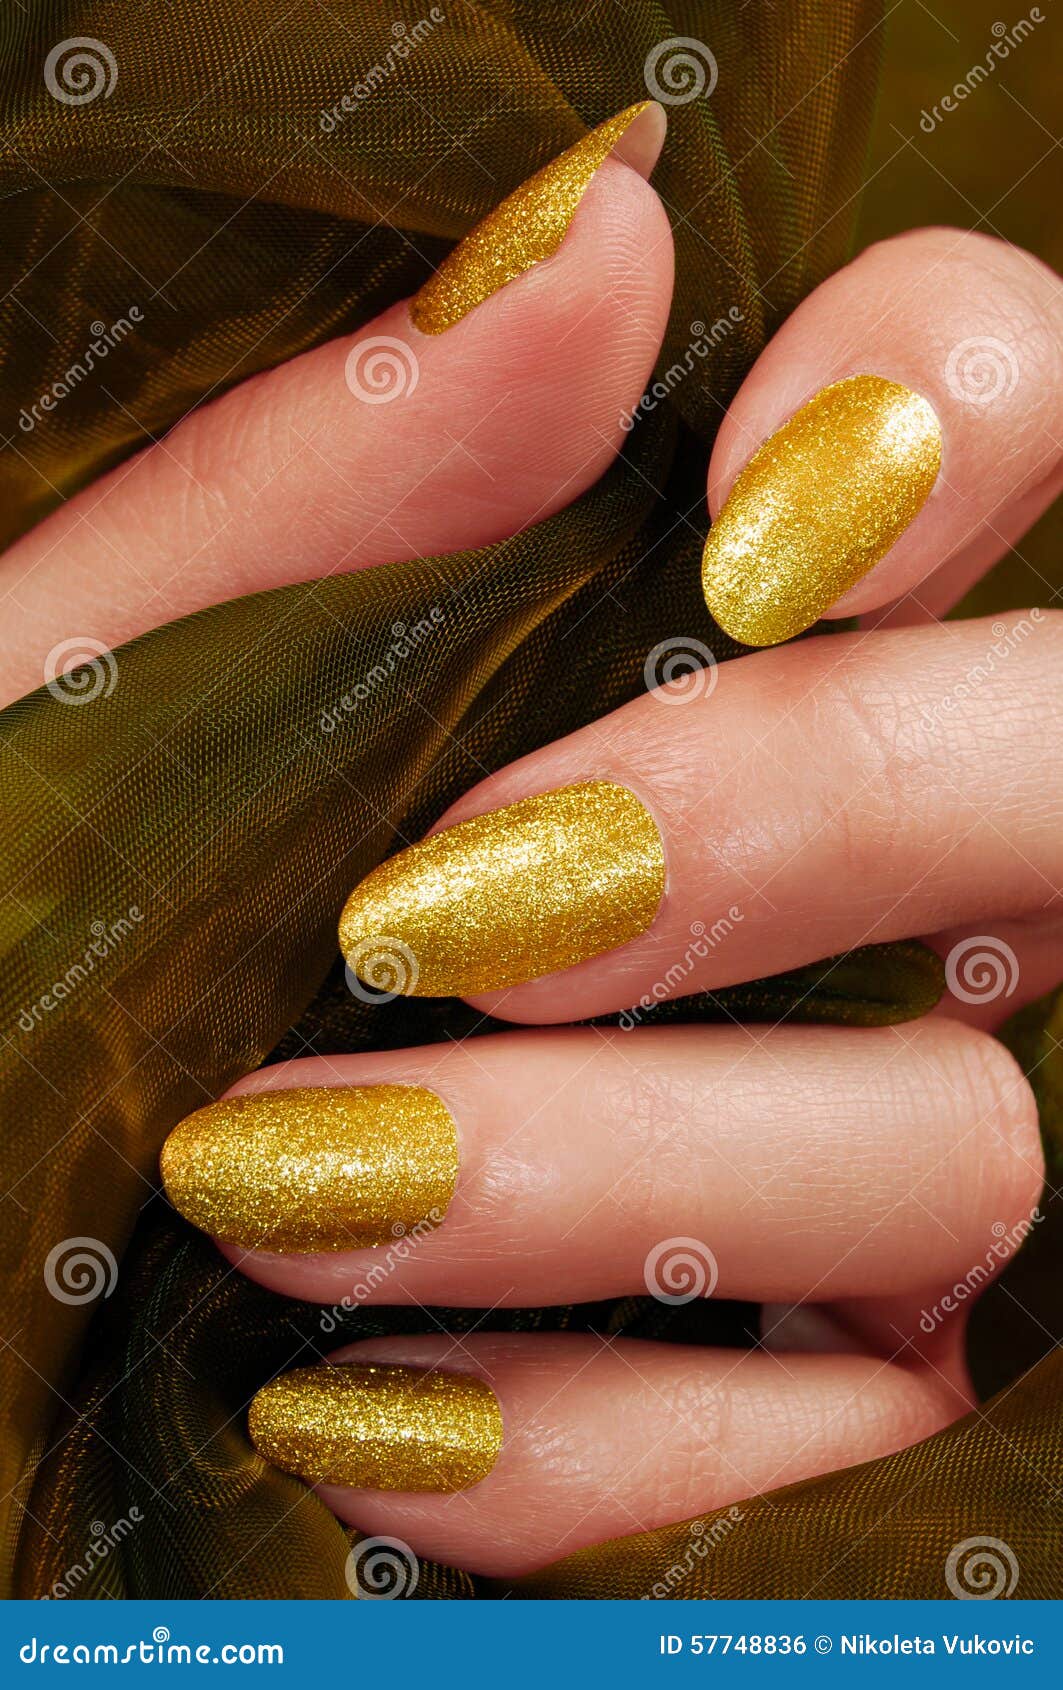 Divine changes manifesting as yellow fingernails - Spiritual Science  Research Foundation